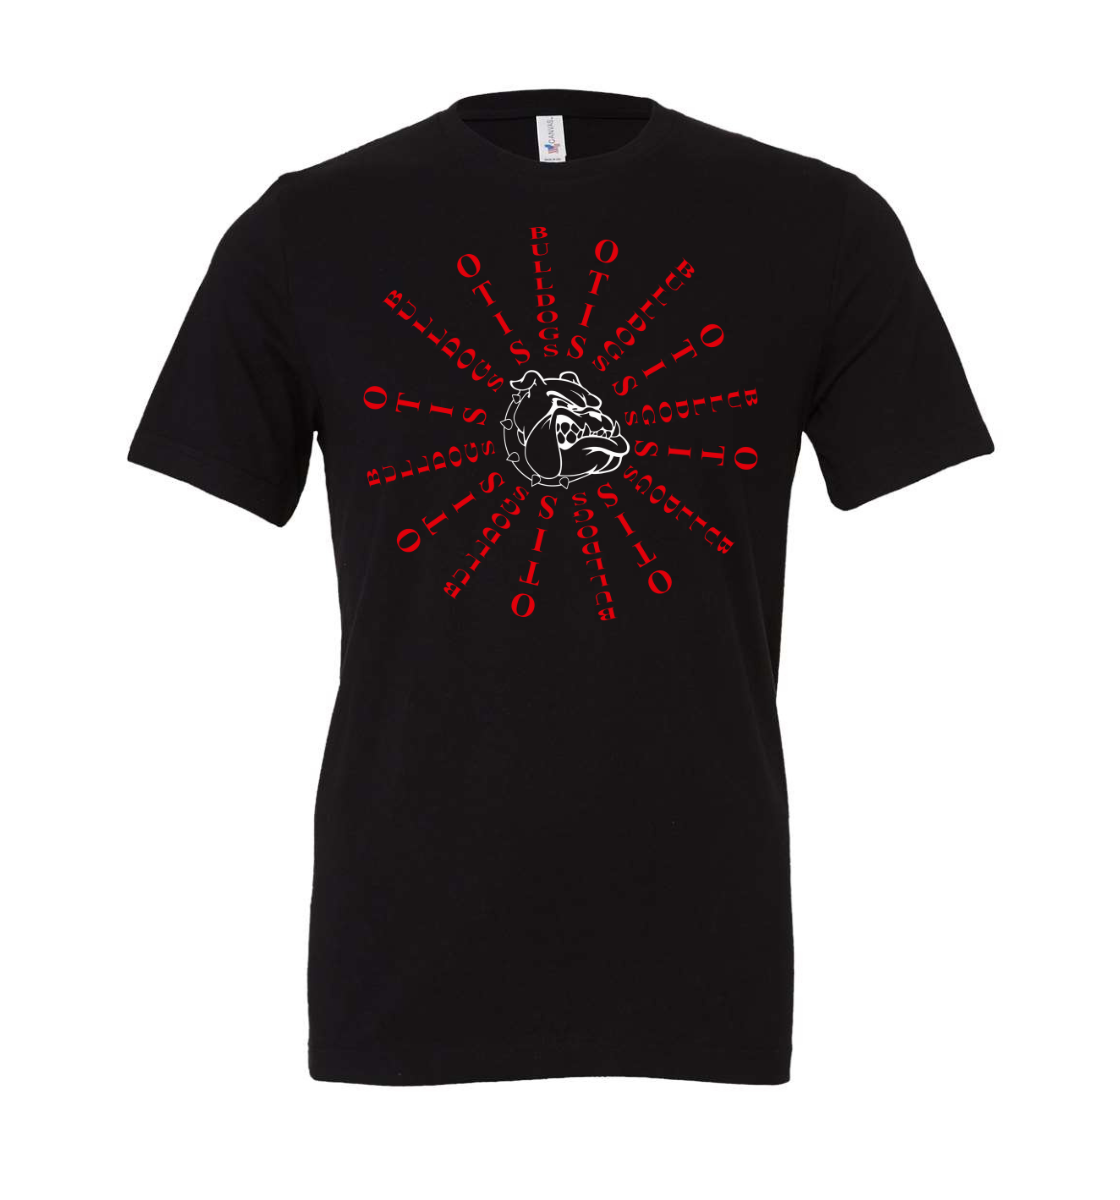 otis bulldogs youth t-shirt: for young otis bulldogs fans only!